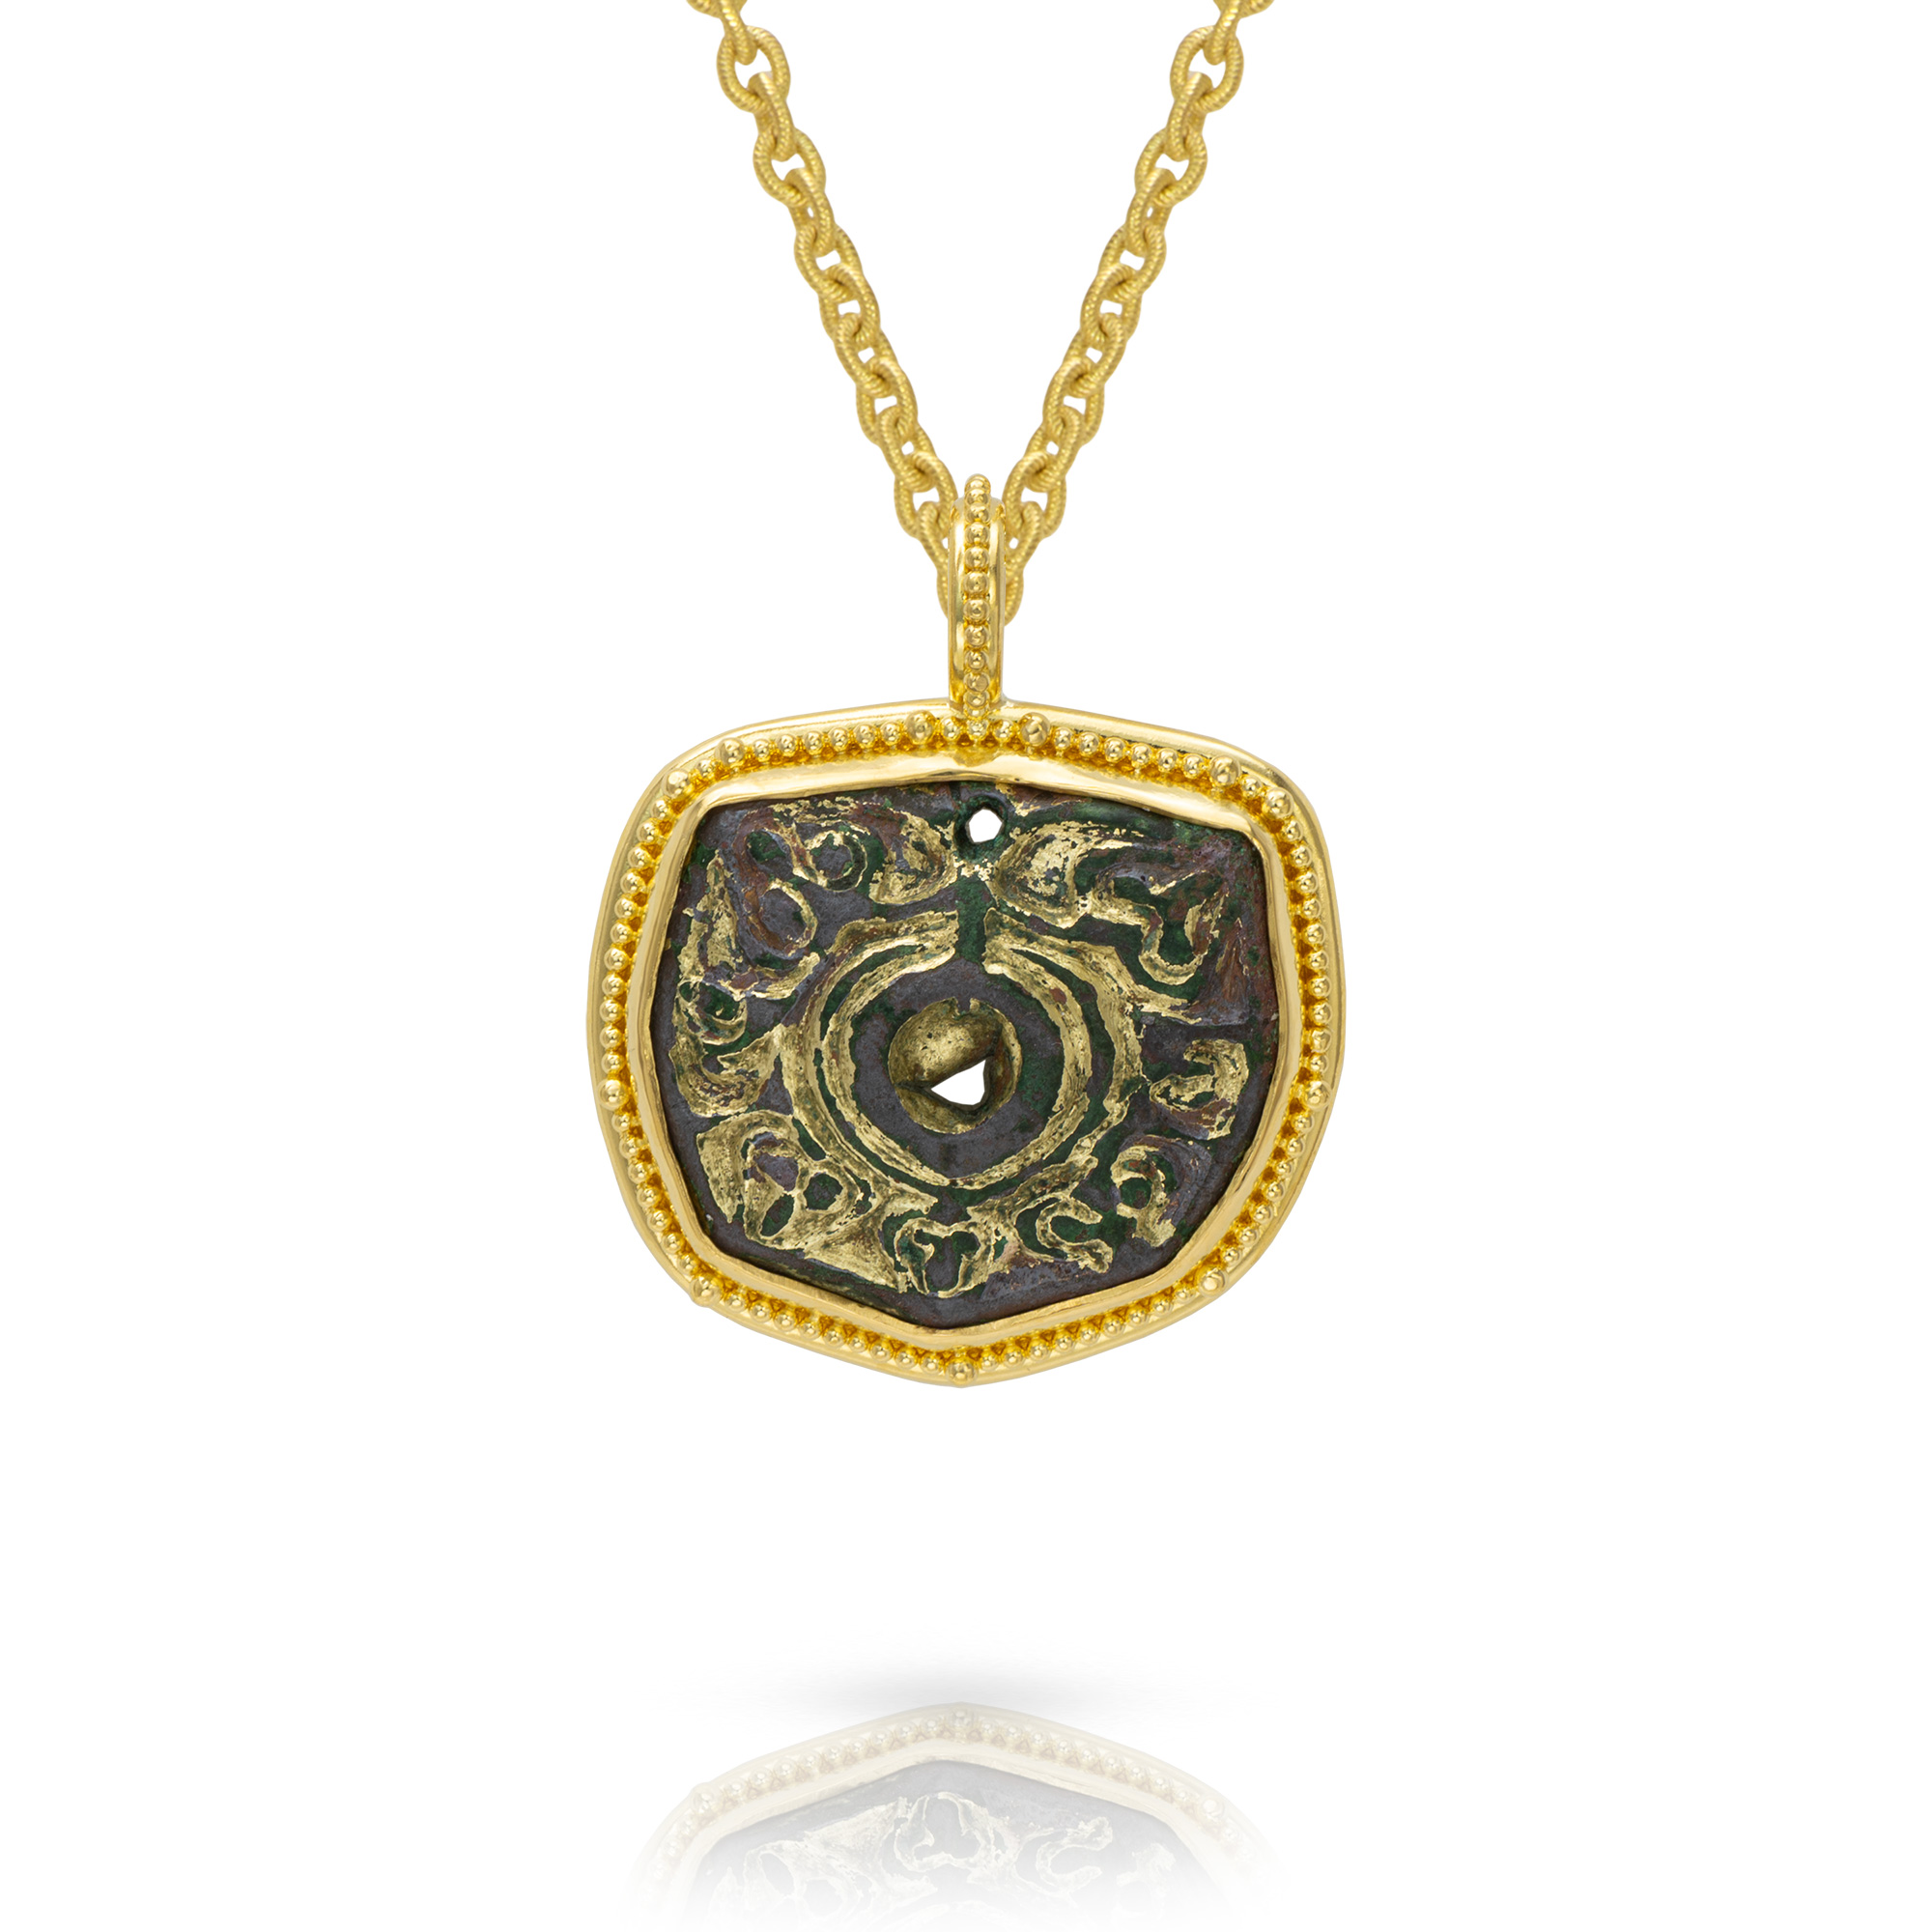 22kt granulation pendant with Medieval artifact